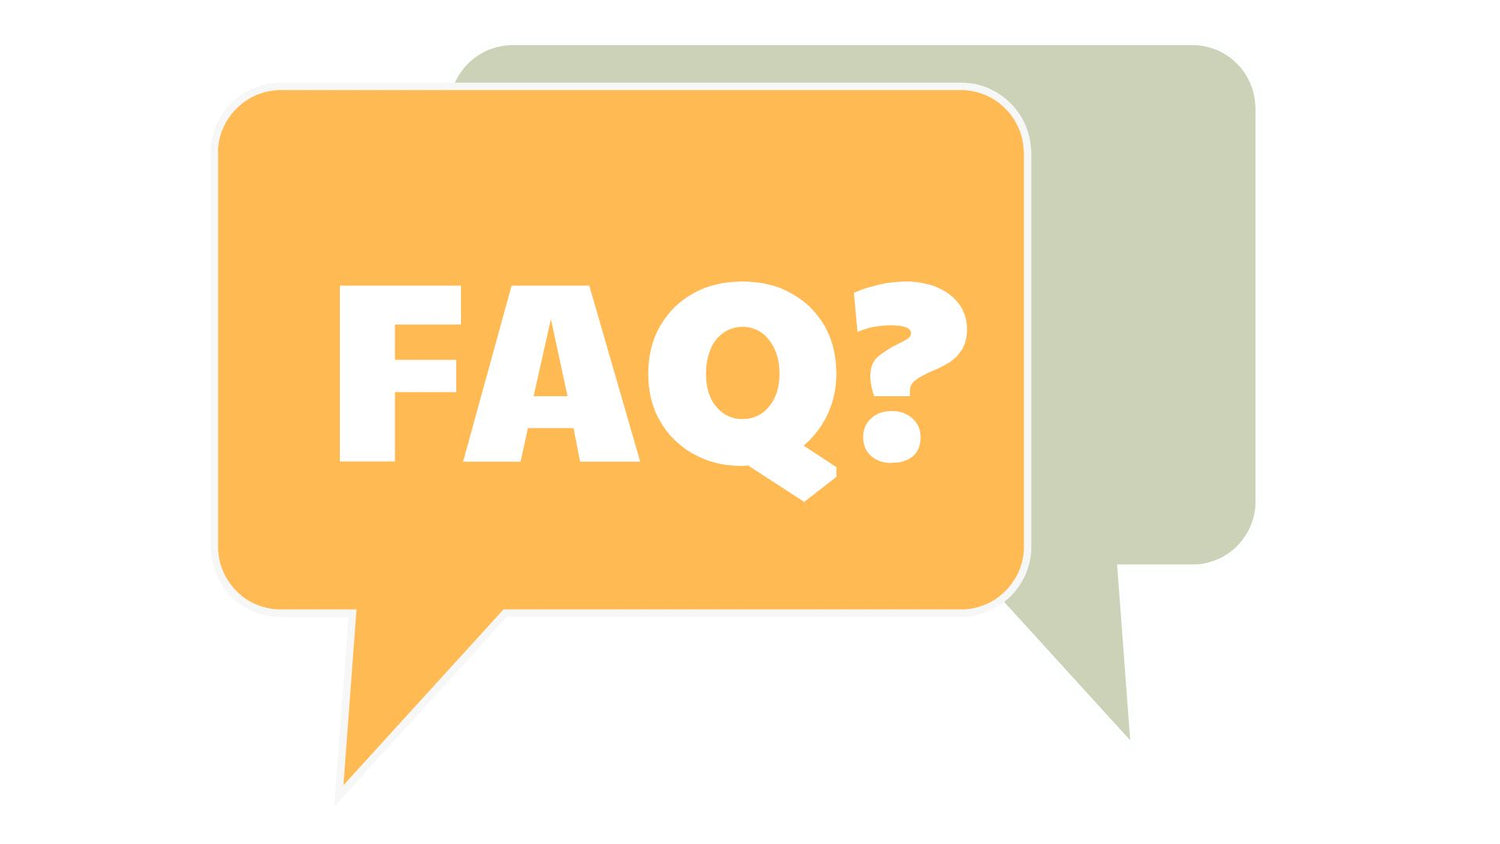 questions fréquentes - frequently asked questions